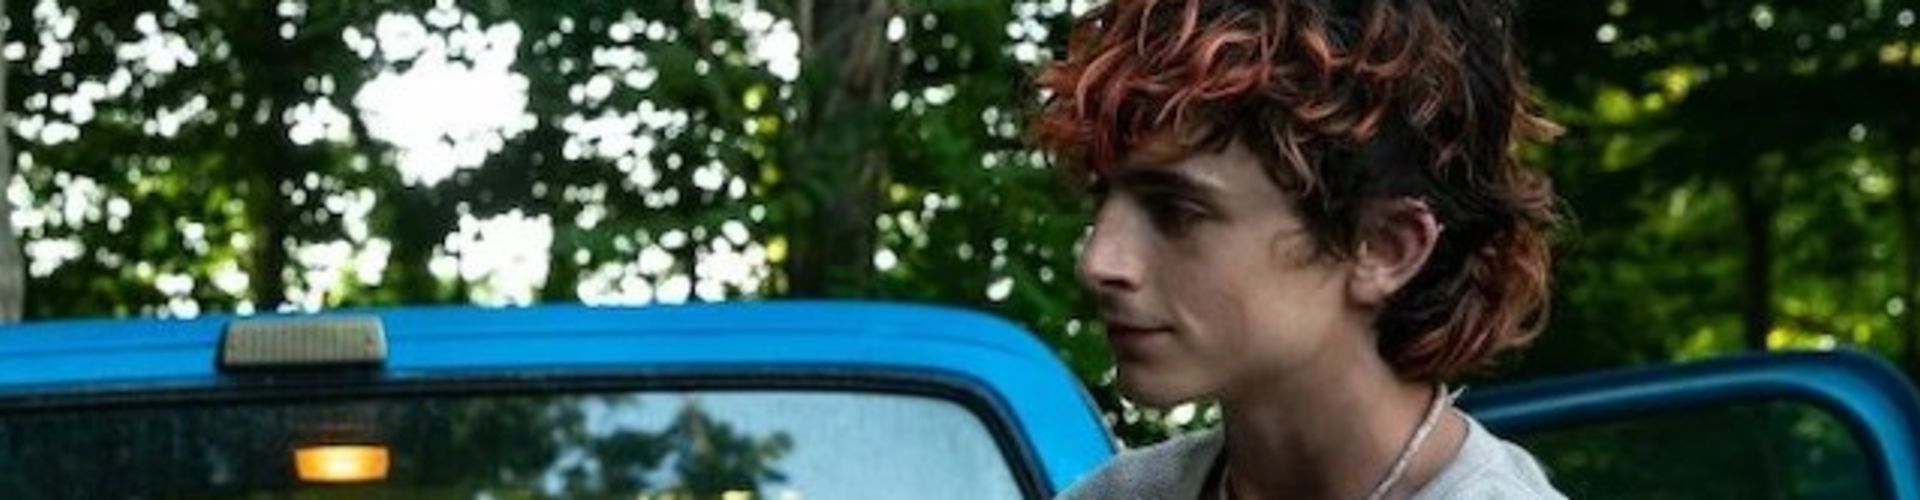 Bones And All Trailer Is Out, Starring Timothée Chalamet